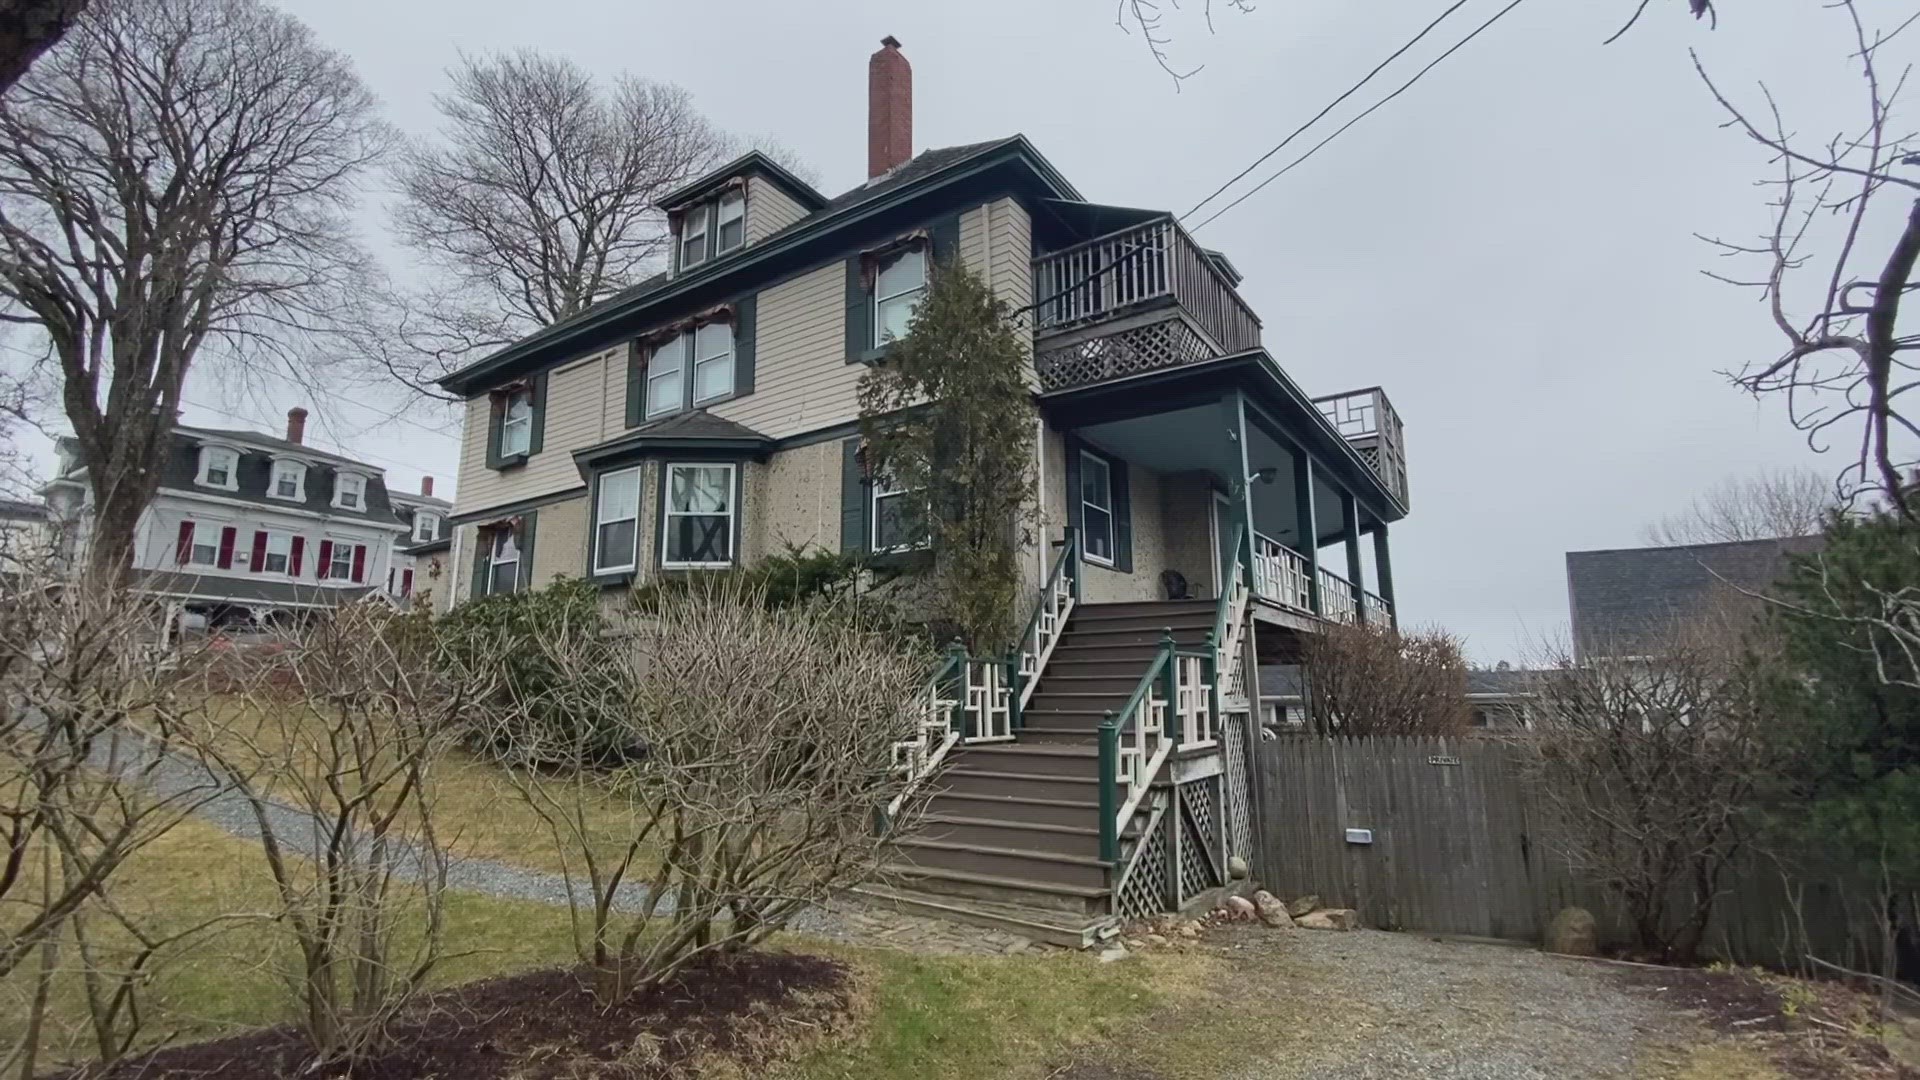 There's a big demand for seasonal workers on Mount Desert Island, but housing can be hard to come secure. A nonprofit on the island is trying to fix that.